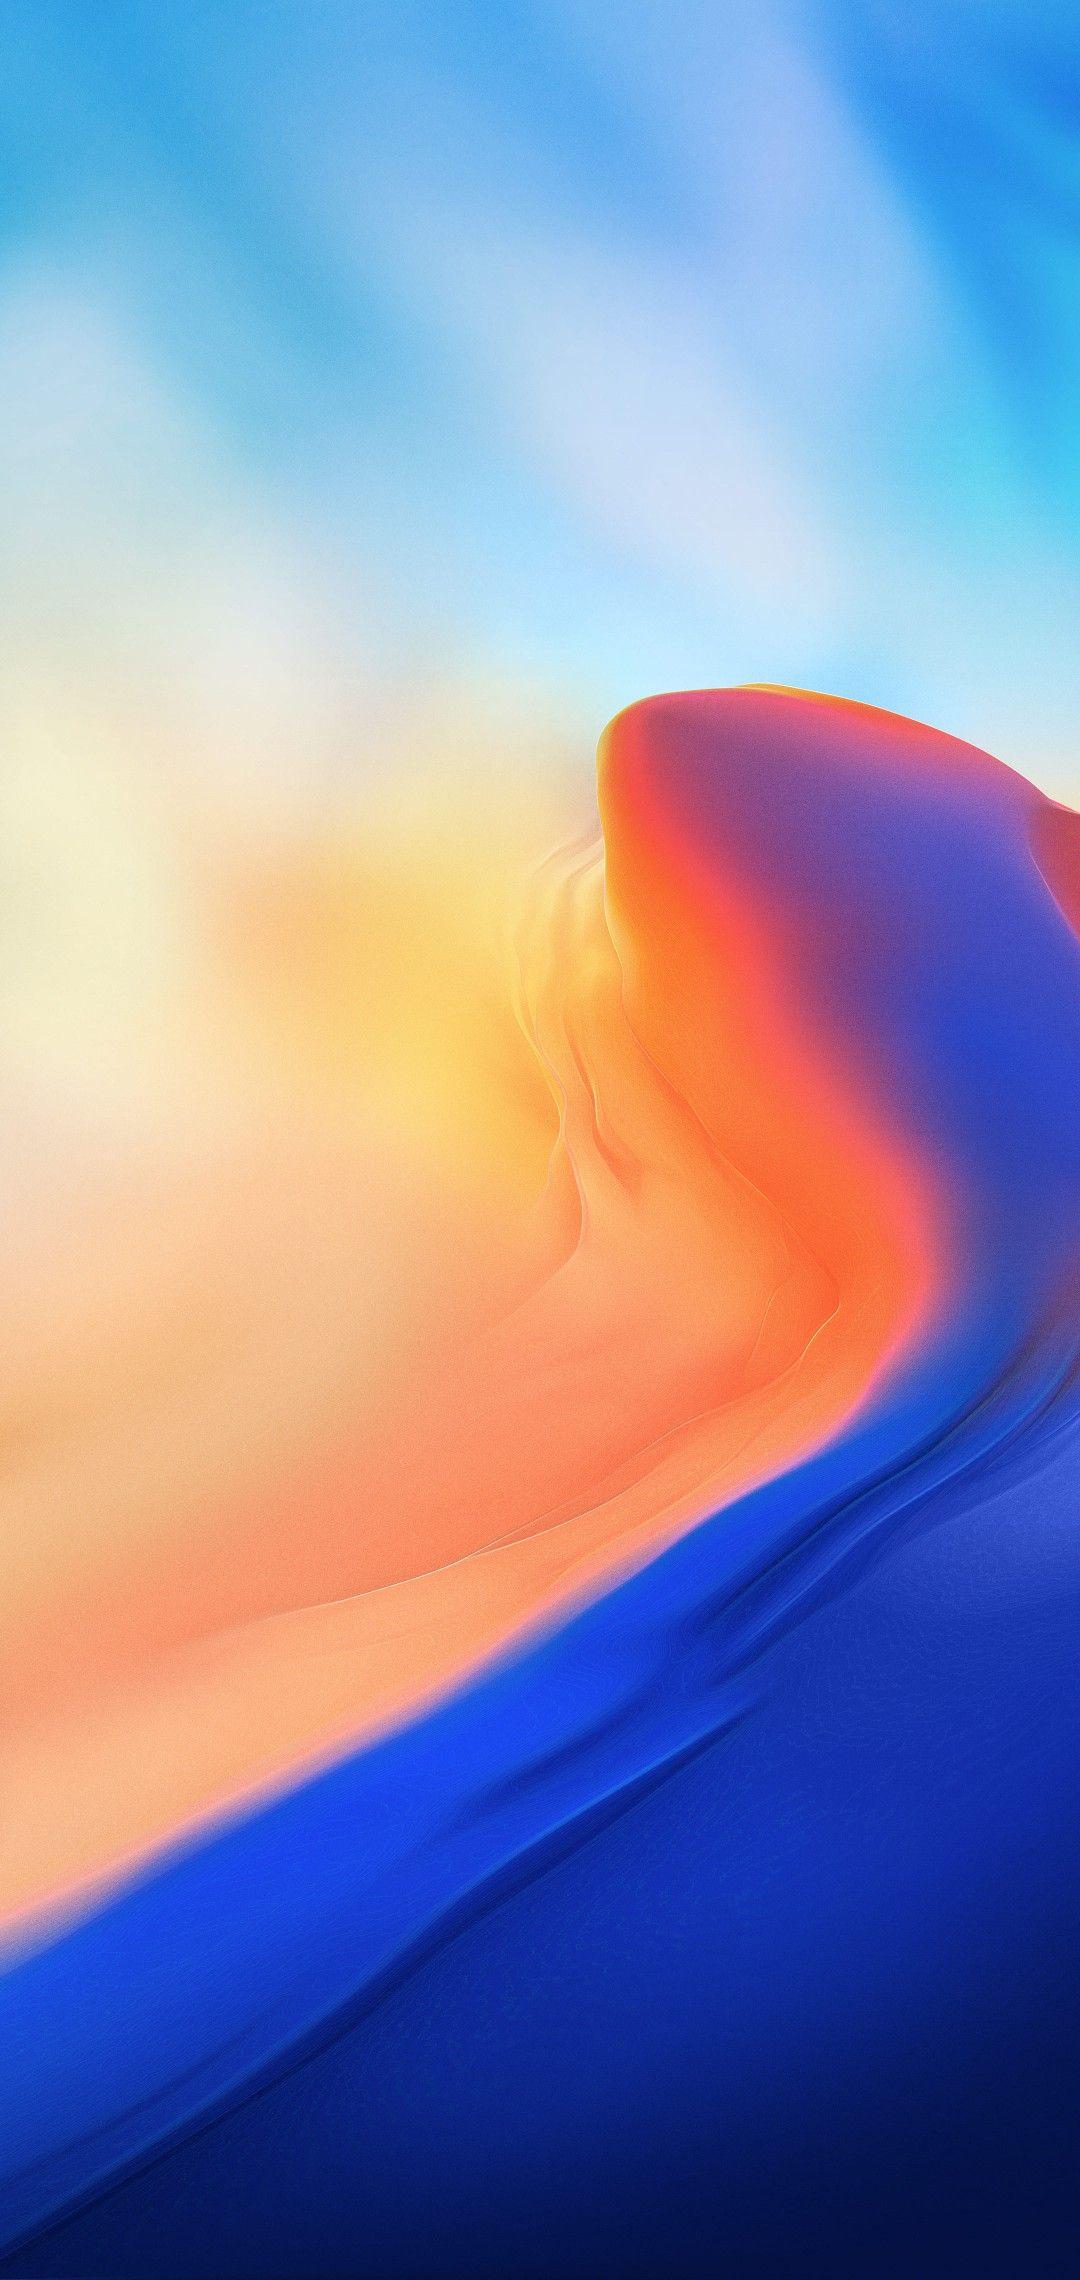 iOS iPhone X, orange, red, blue, clean, simple, abstract, apple